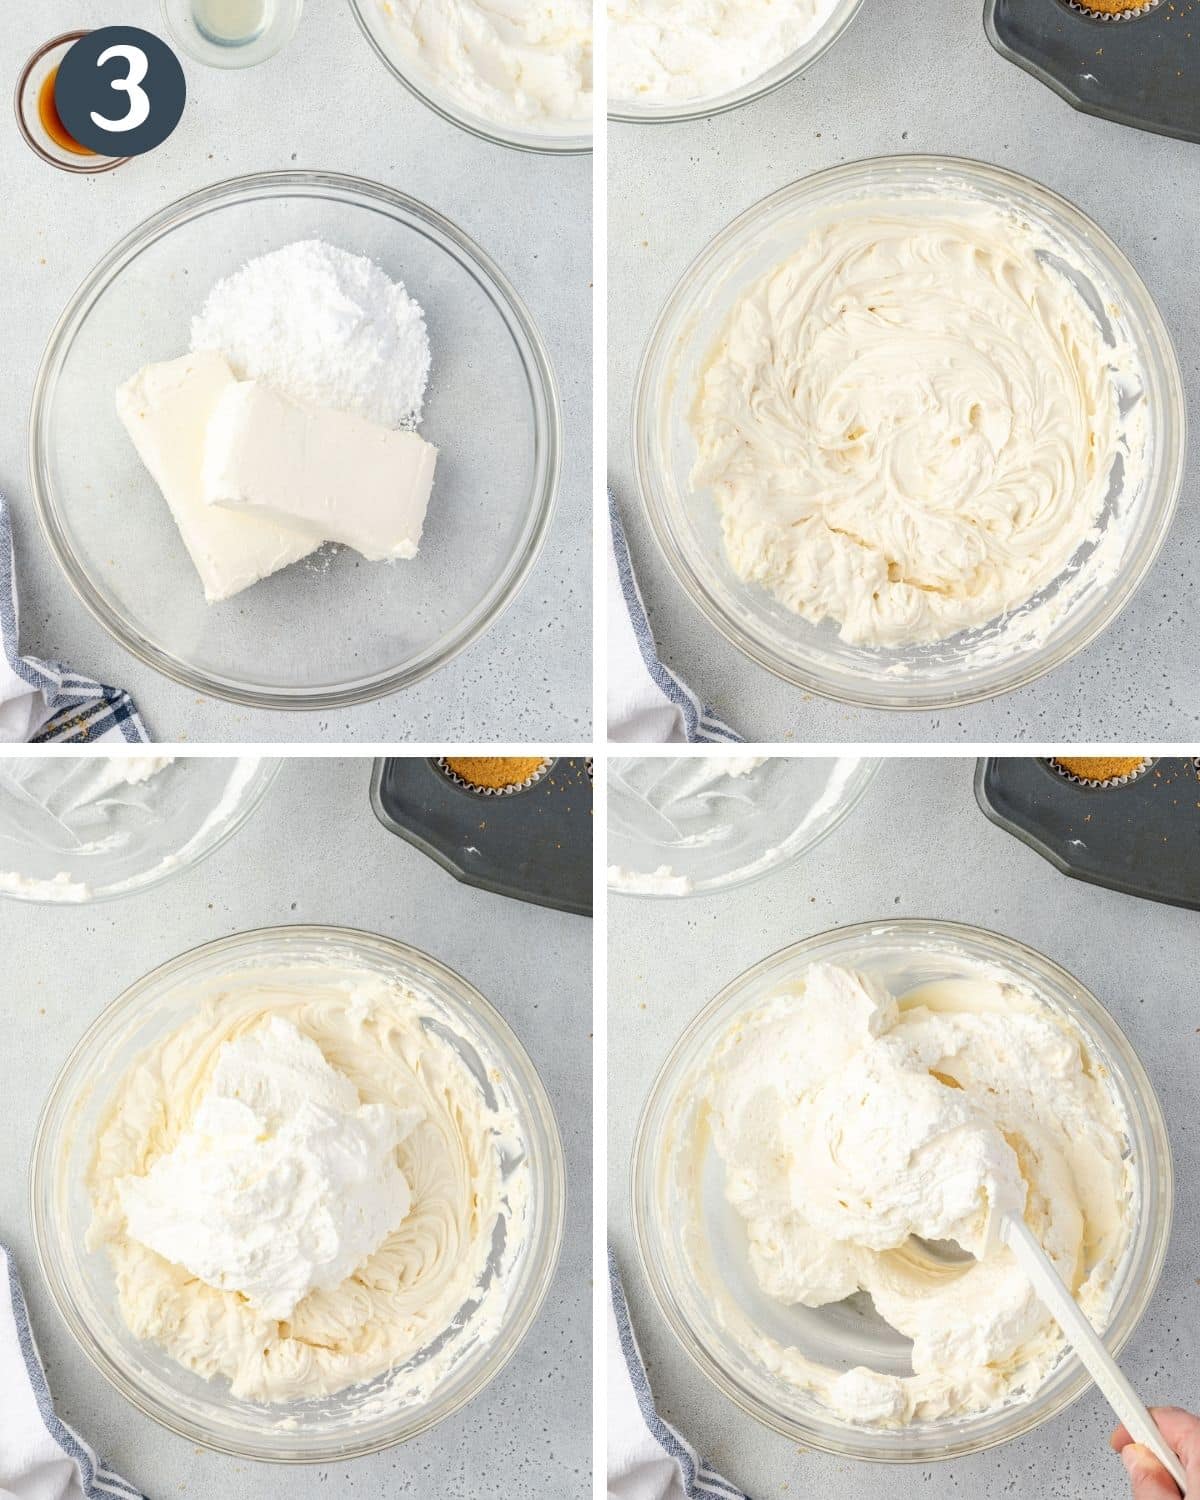 4 steps showing the process of making no-bake cheesecake filling.